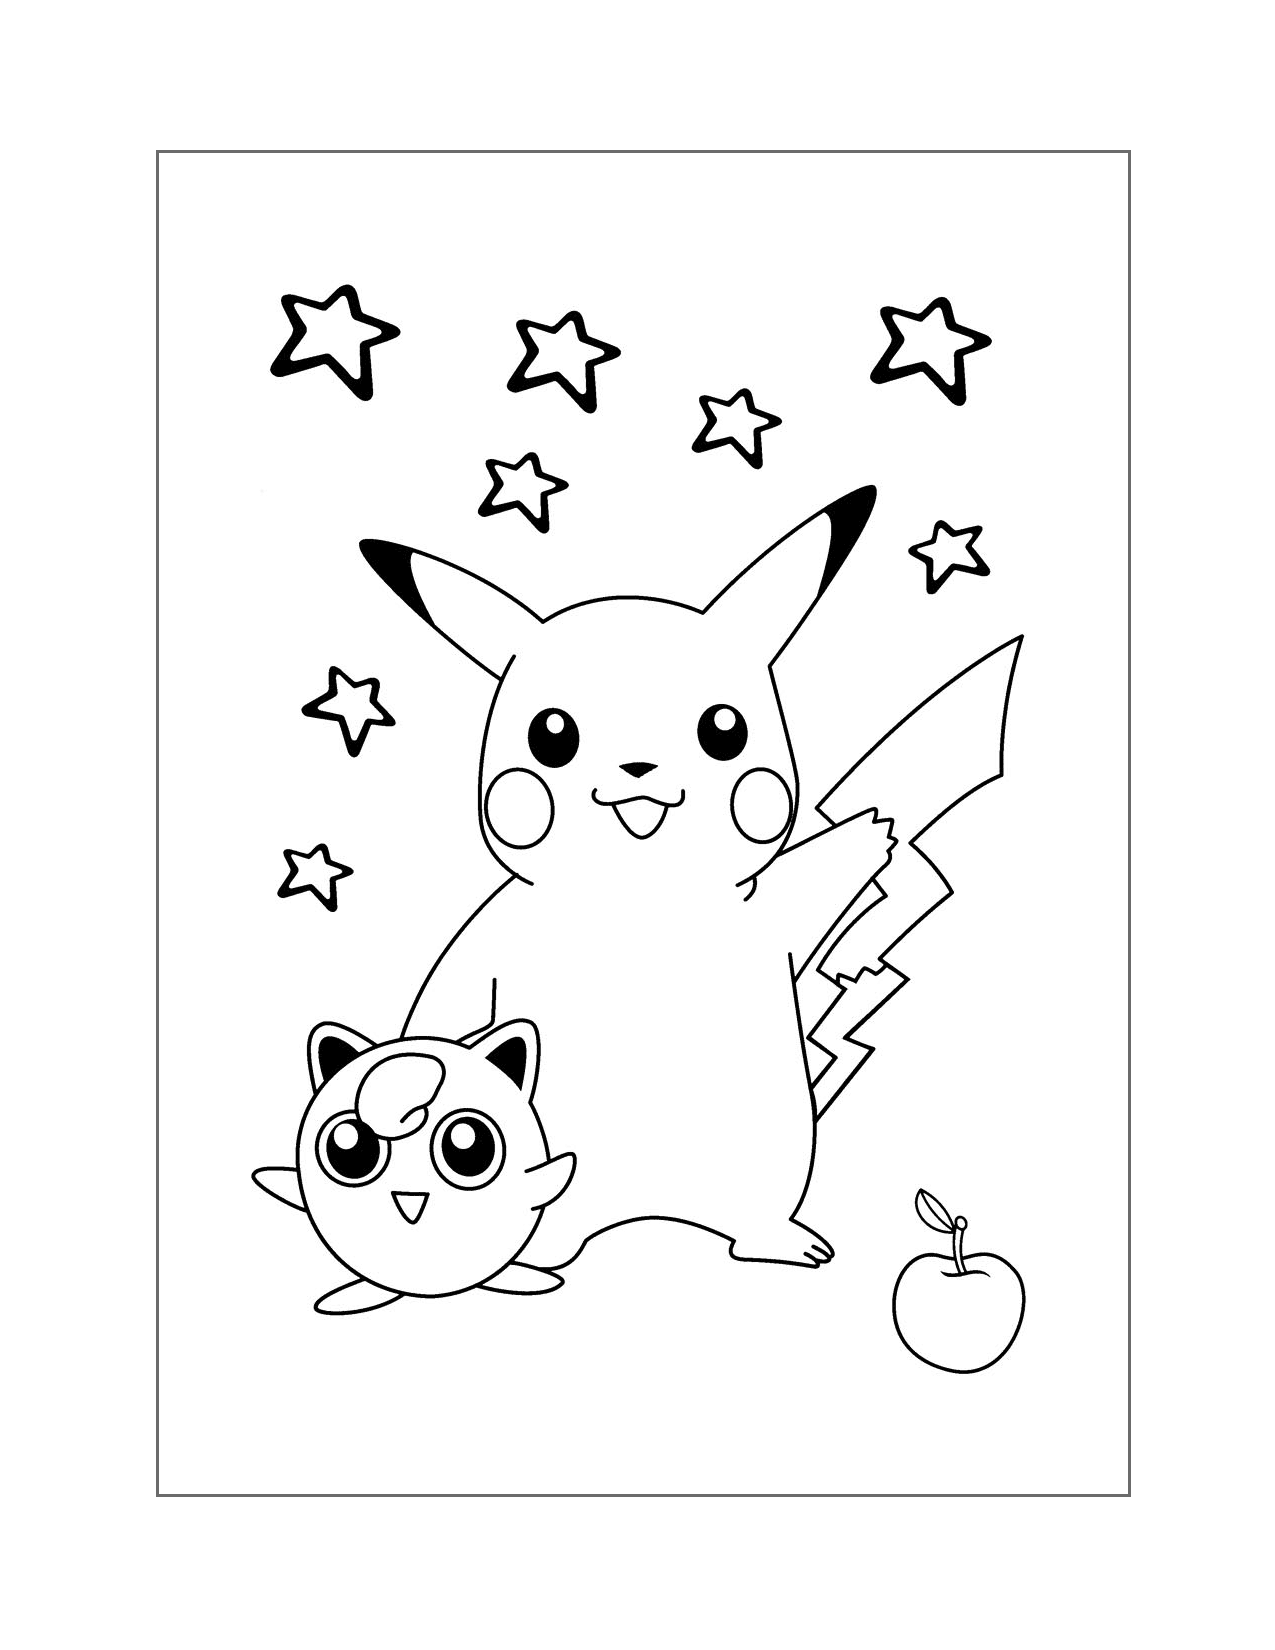 Pikachu And Jigglypuff Coloring Page